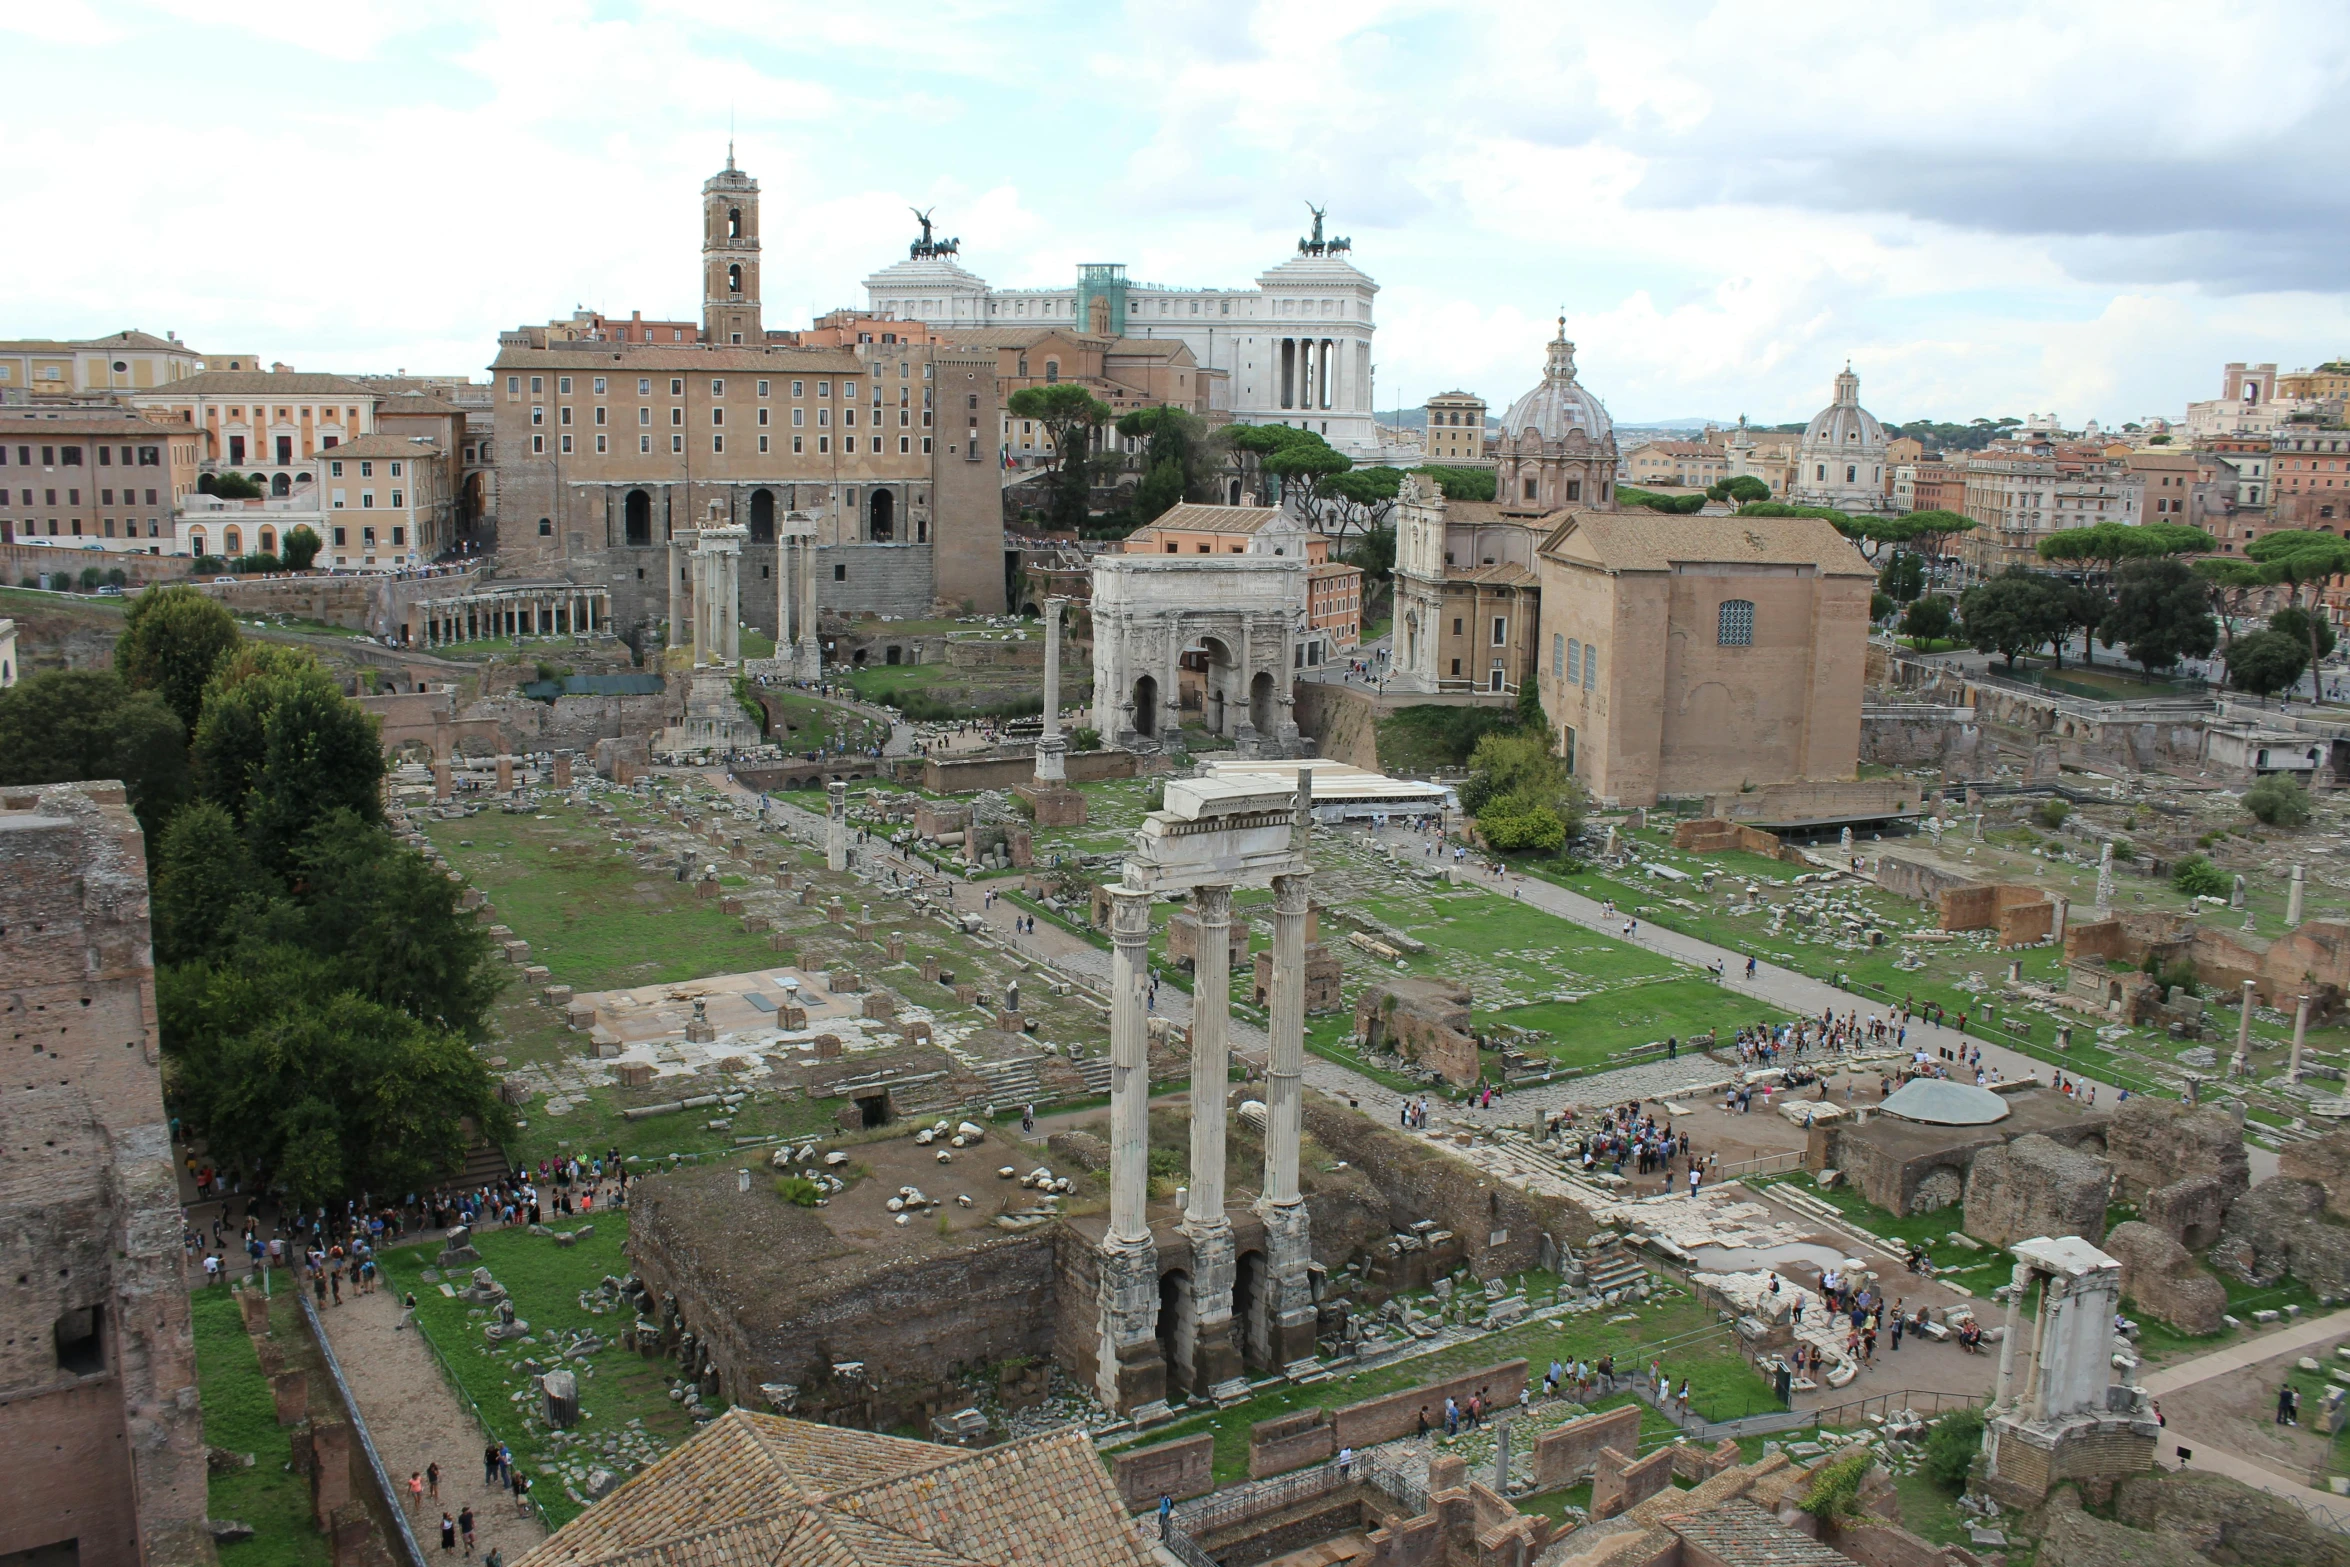 ruins of roman buildings and a cemetery in the distance